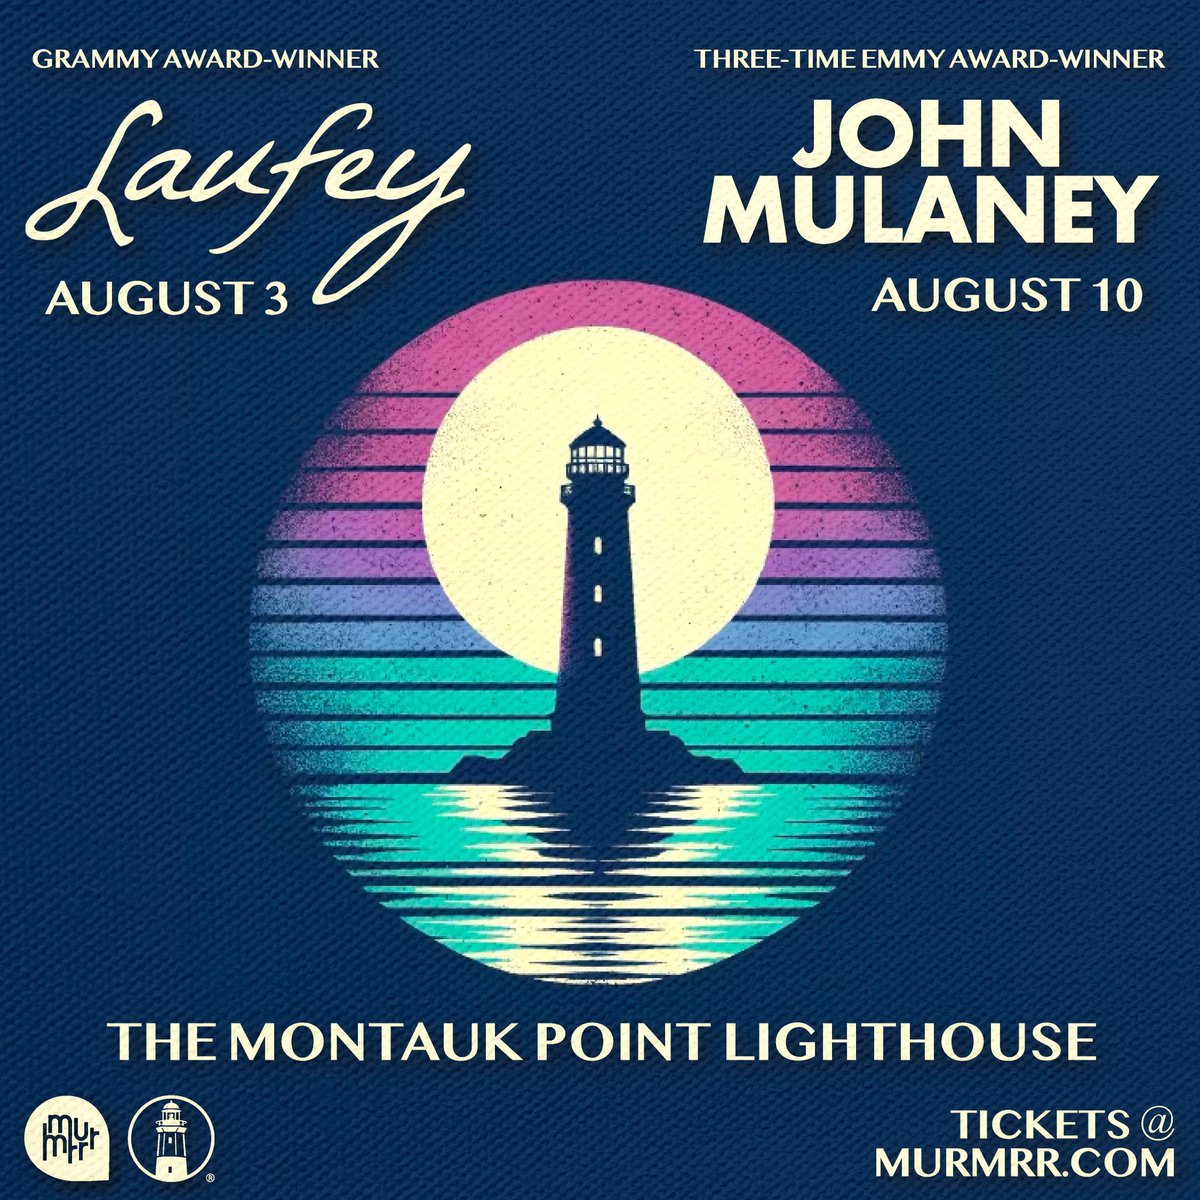 The show in Montauk in August is a benefit #johnmulaney